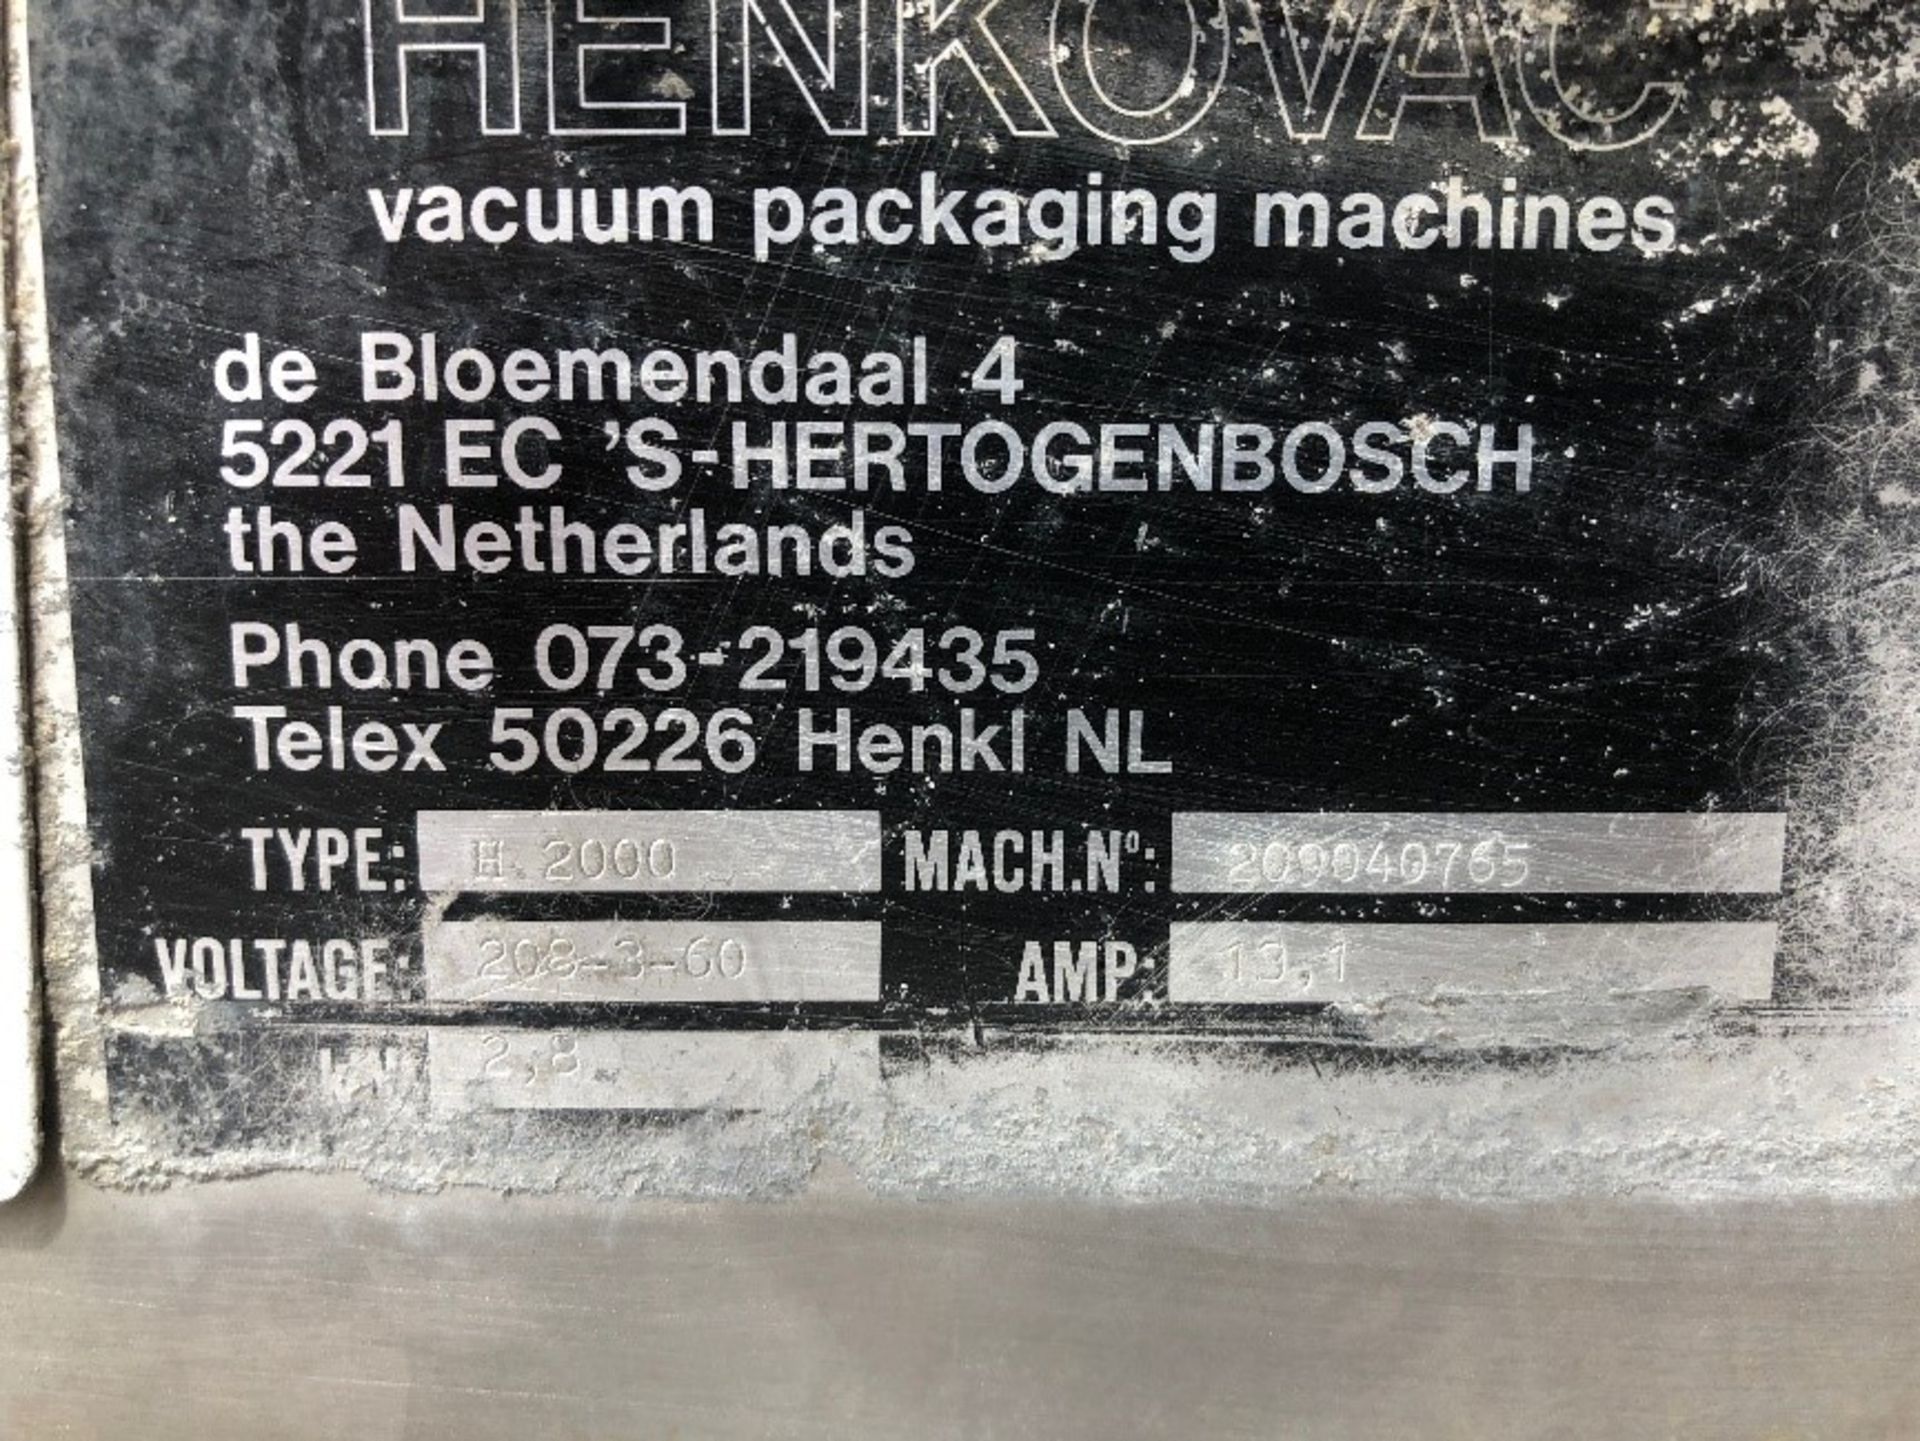 Henkovac Bag Sealer, Type H.2000, Machine #209040765, with 19" / 19" Chamber, 208 V, 3 Phase ( - Image 4 of 4